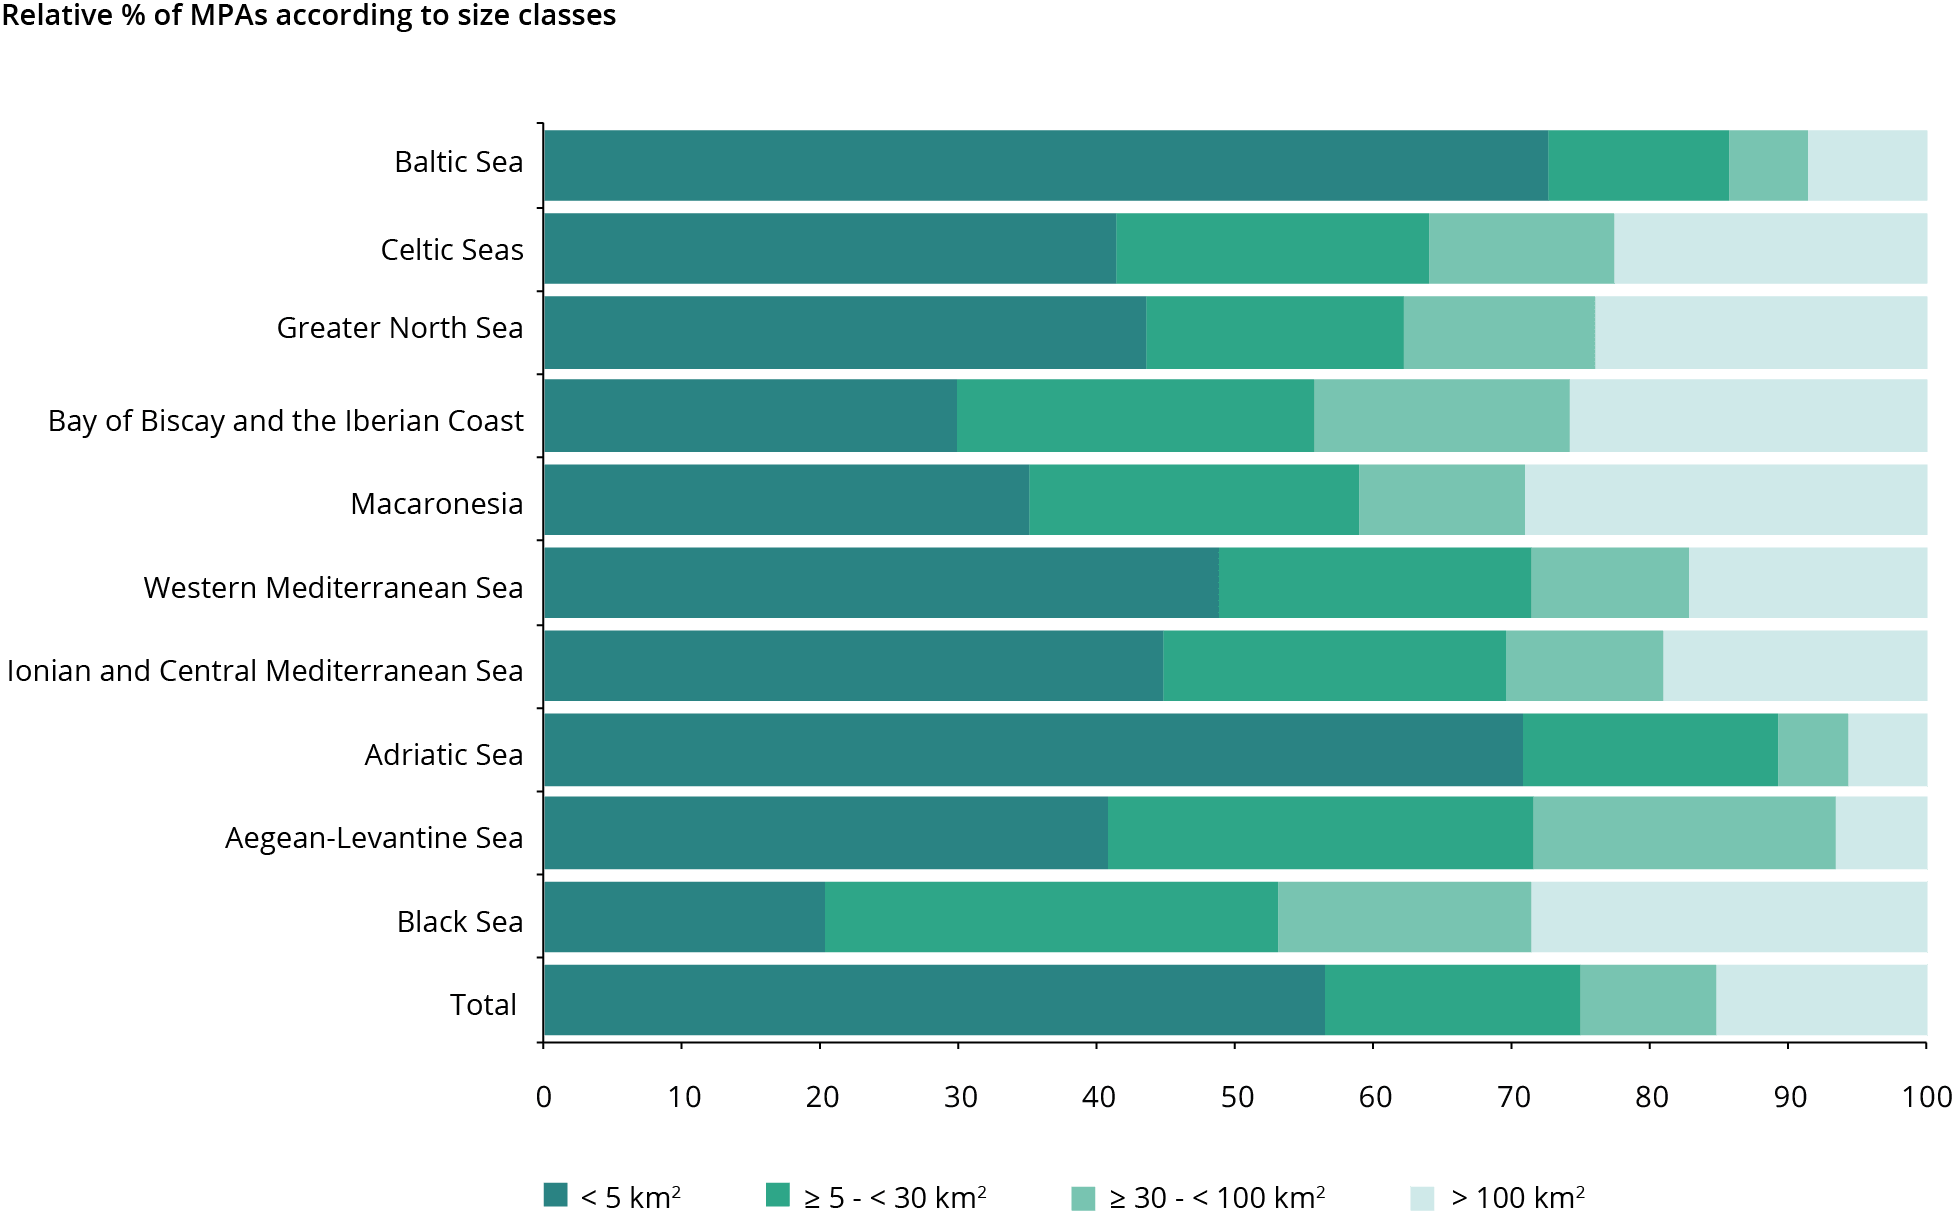 Relative % of MPAs according to size classes